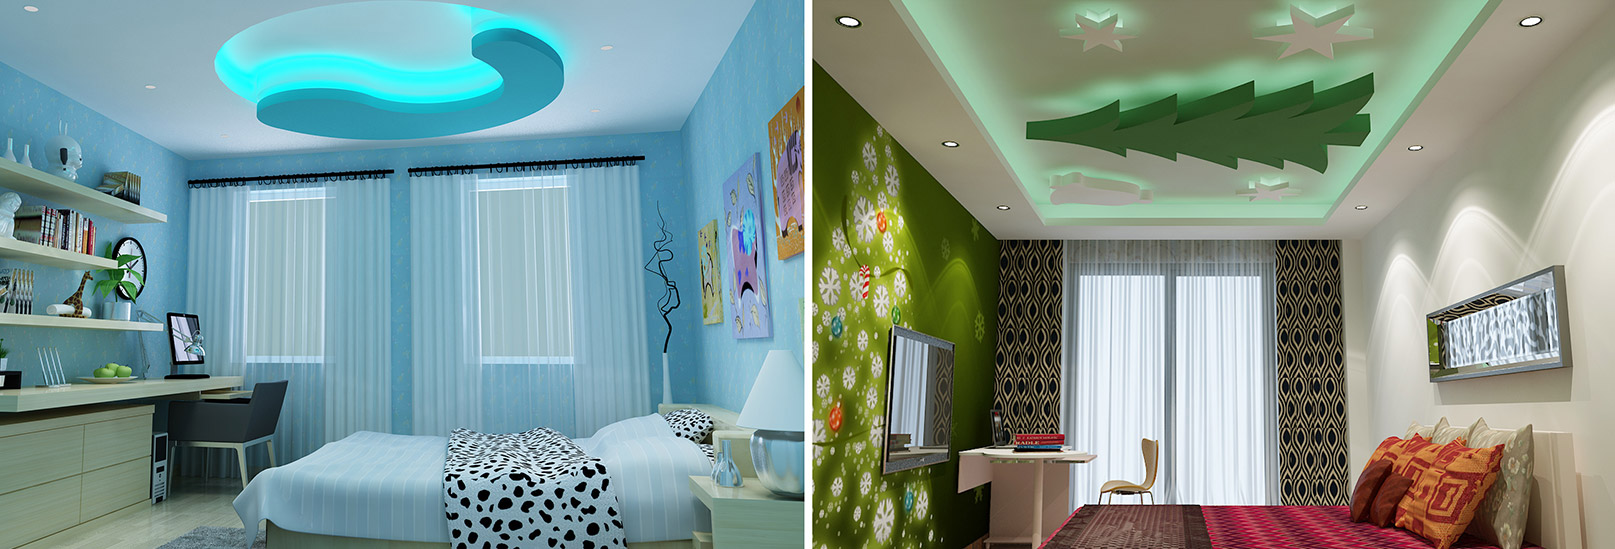 How to Choose Between PoP and Gypsum False Ceiling - Saint-Gobain ...